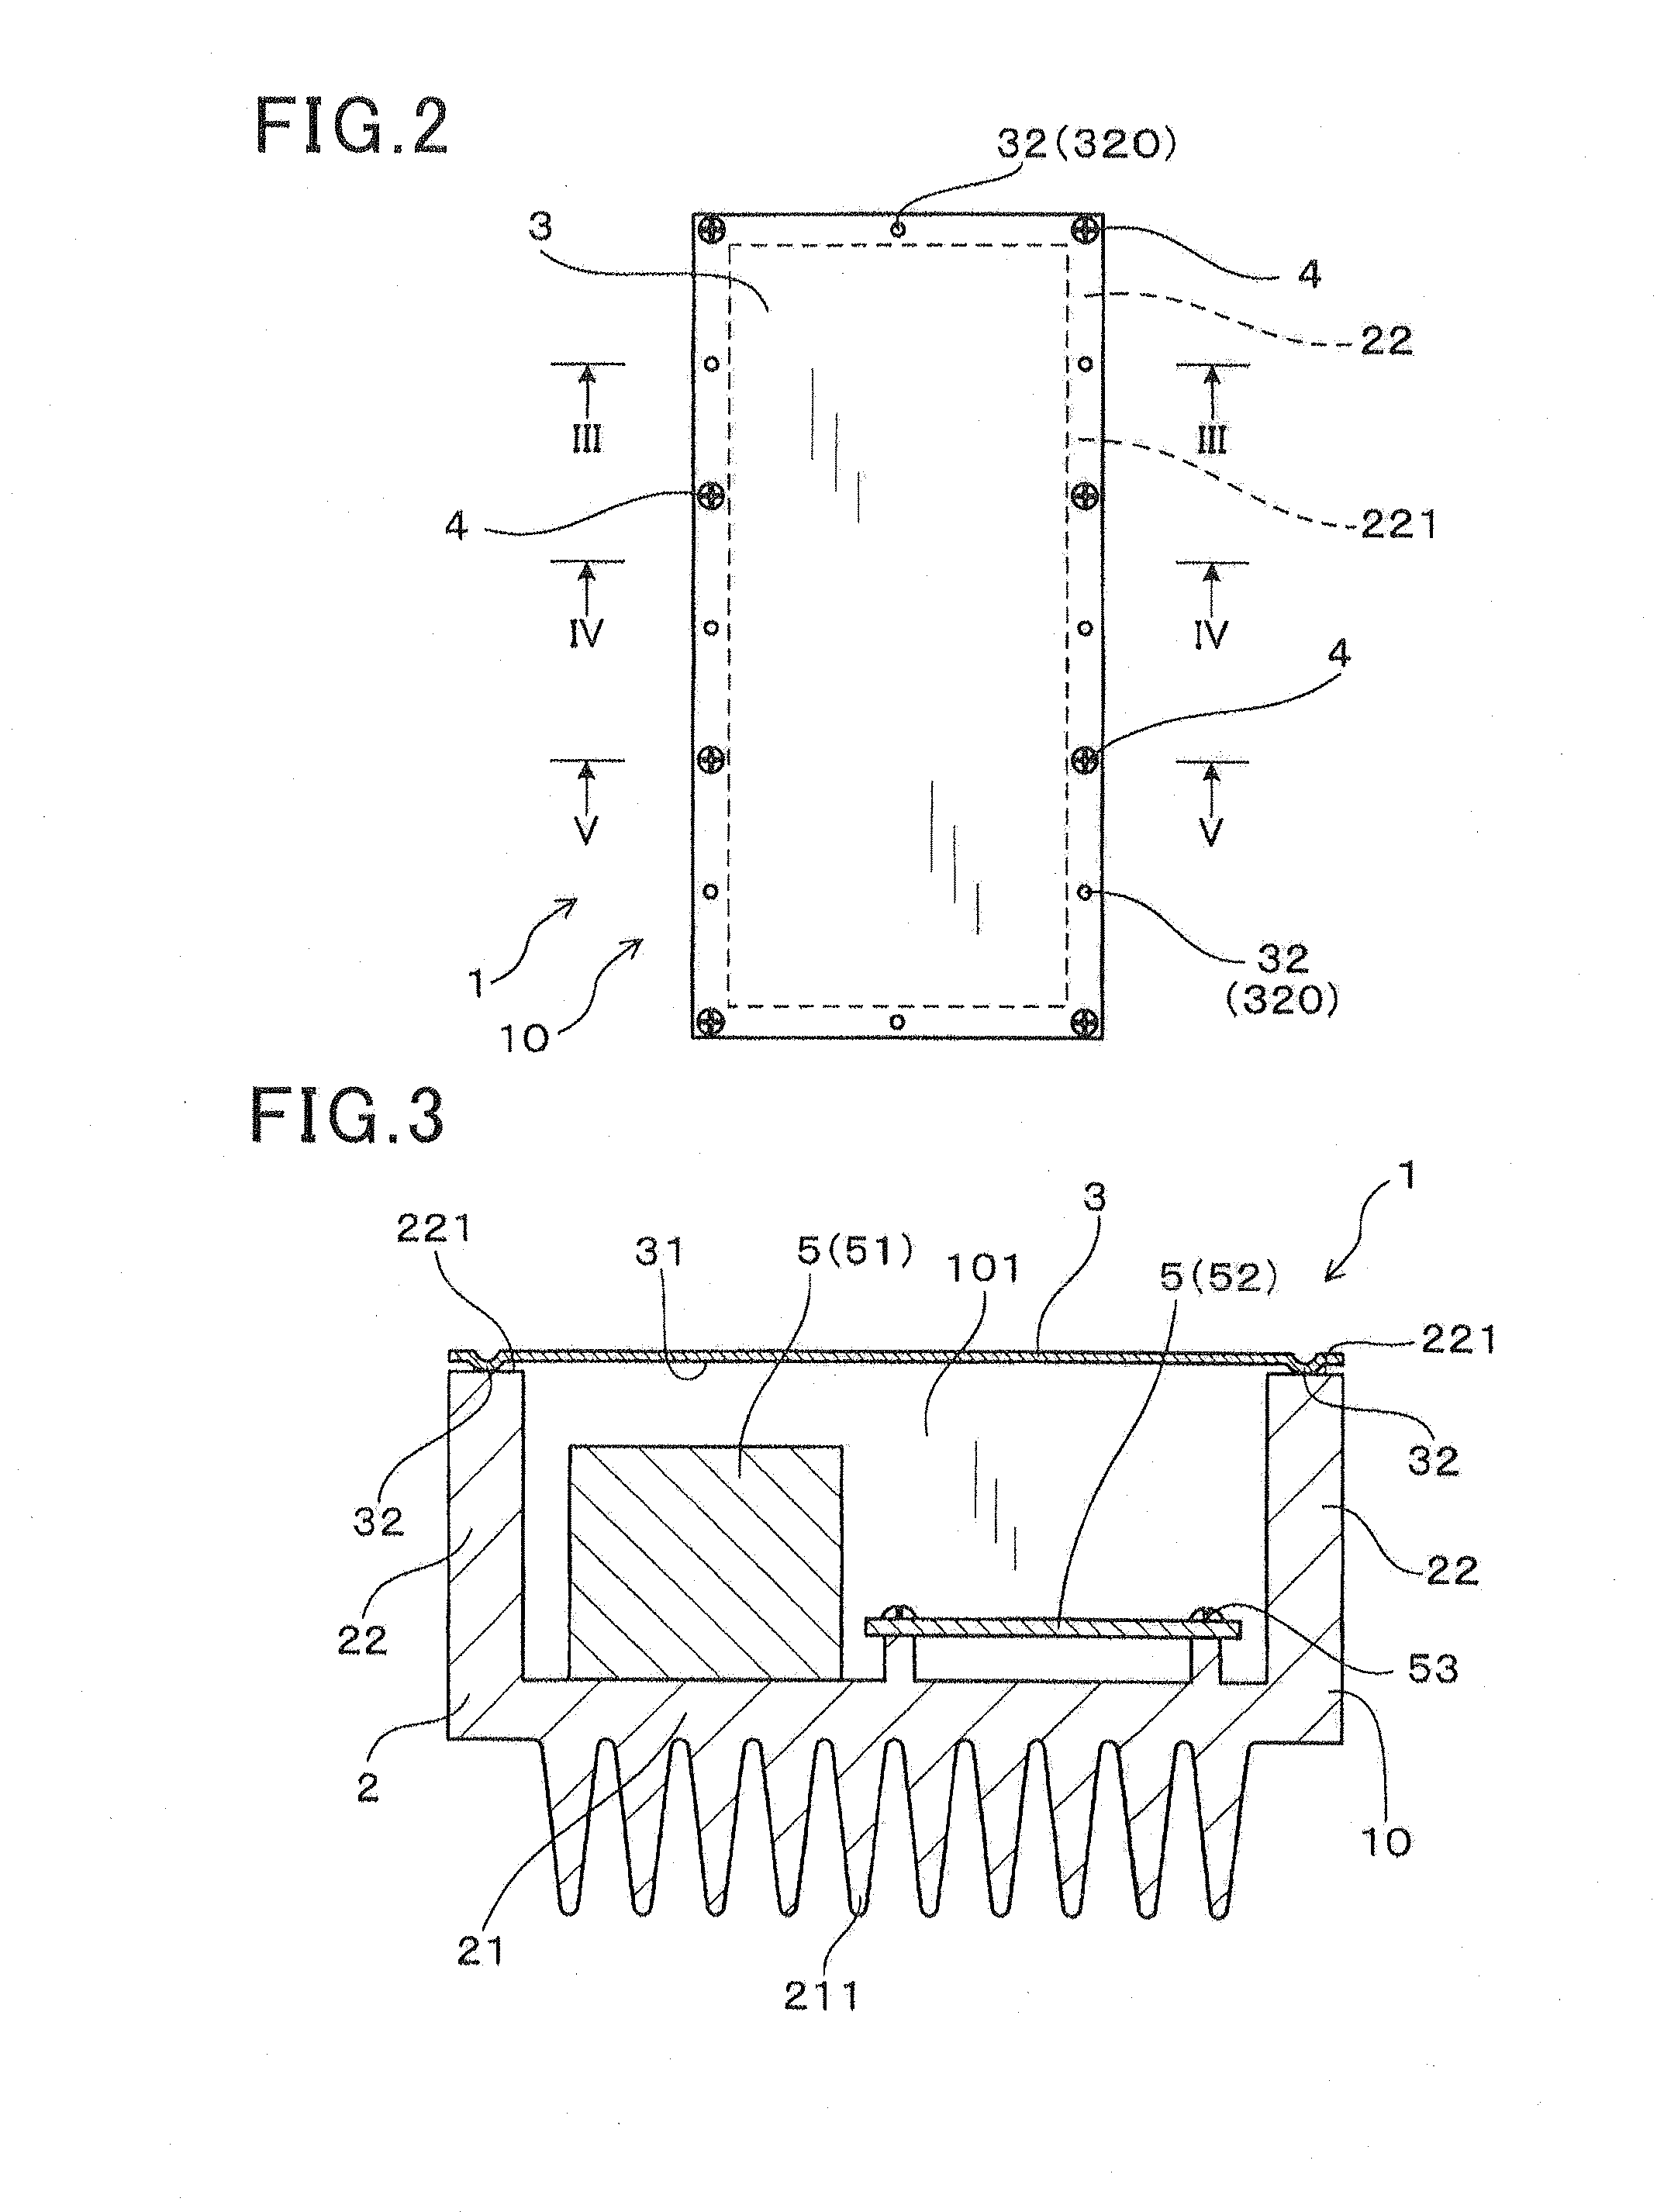 Electrical device